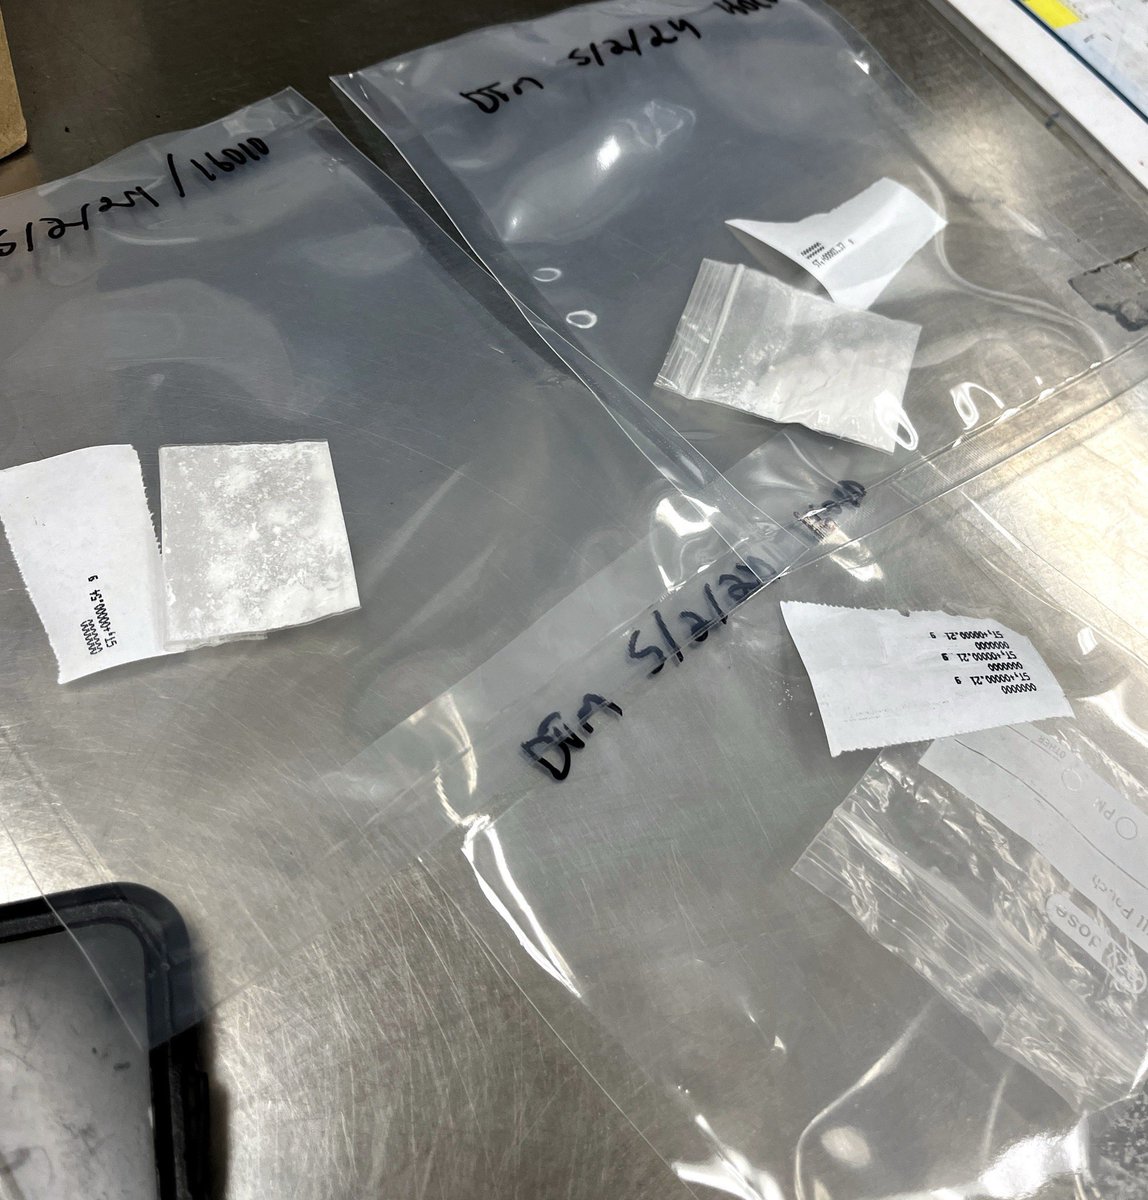 Powdered Fentanyl Seized Good policework comes in many forms. Sometimes it’s finding a lost purse or recovering a stolen bike. Other times it’s having patience and knowing your community members well enough to act at just the right time to remove dangerous drugs from our